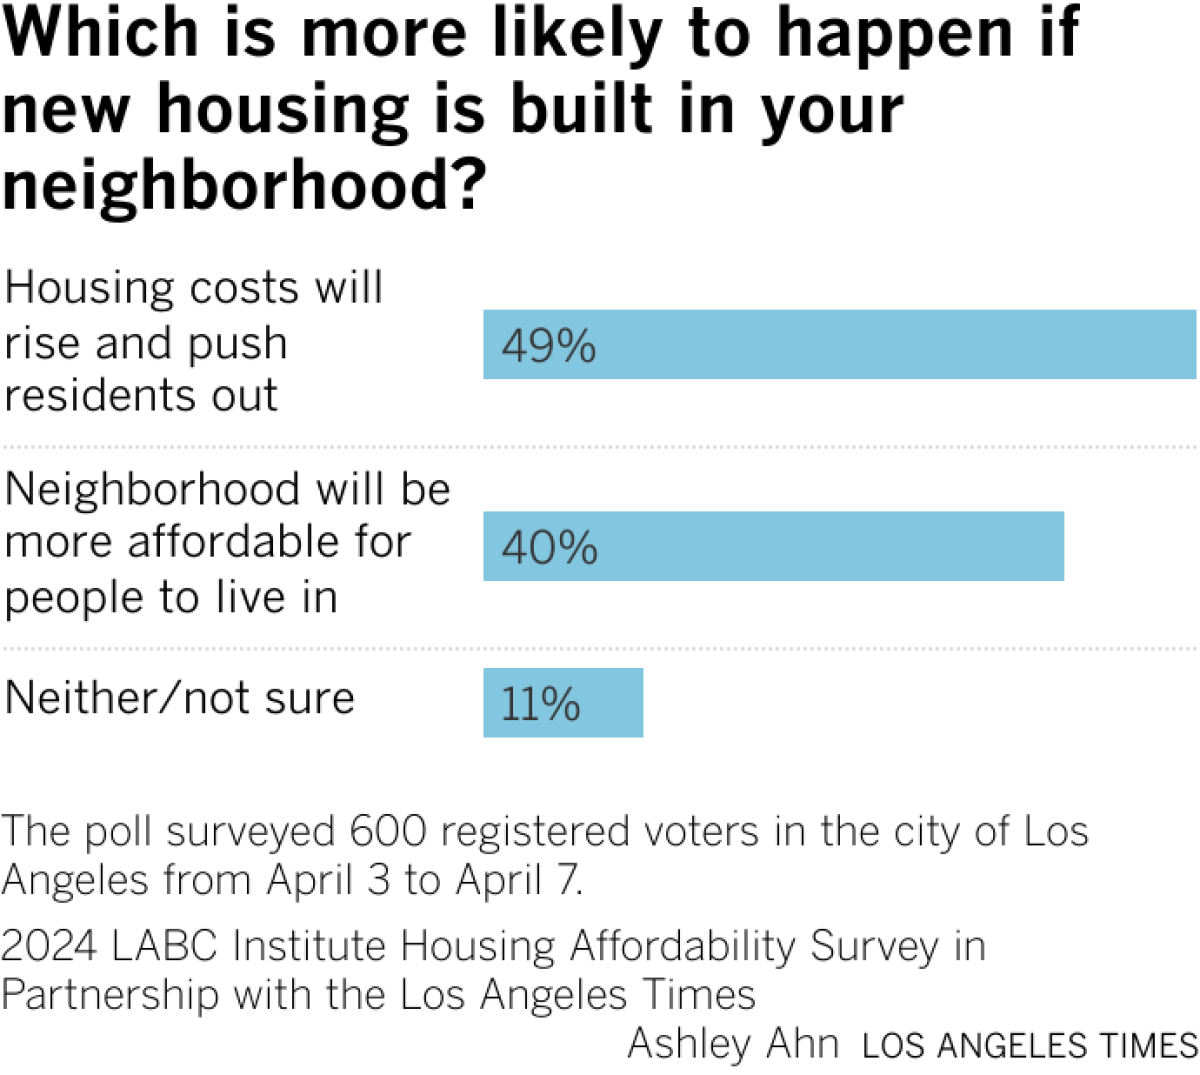 About 40% of respondents said new housing in their neighborhood will most likely make the neighborhood more affordable for people to live in, while 49% said it will drive up housing costs and push residents out. About 11% said they were not sure or neither of those options.